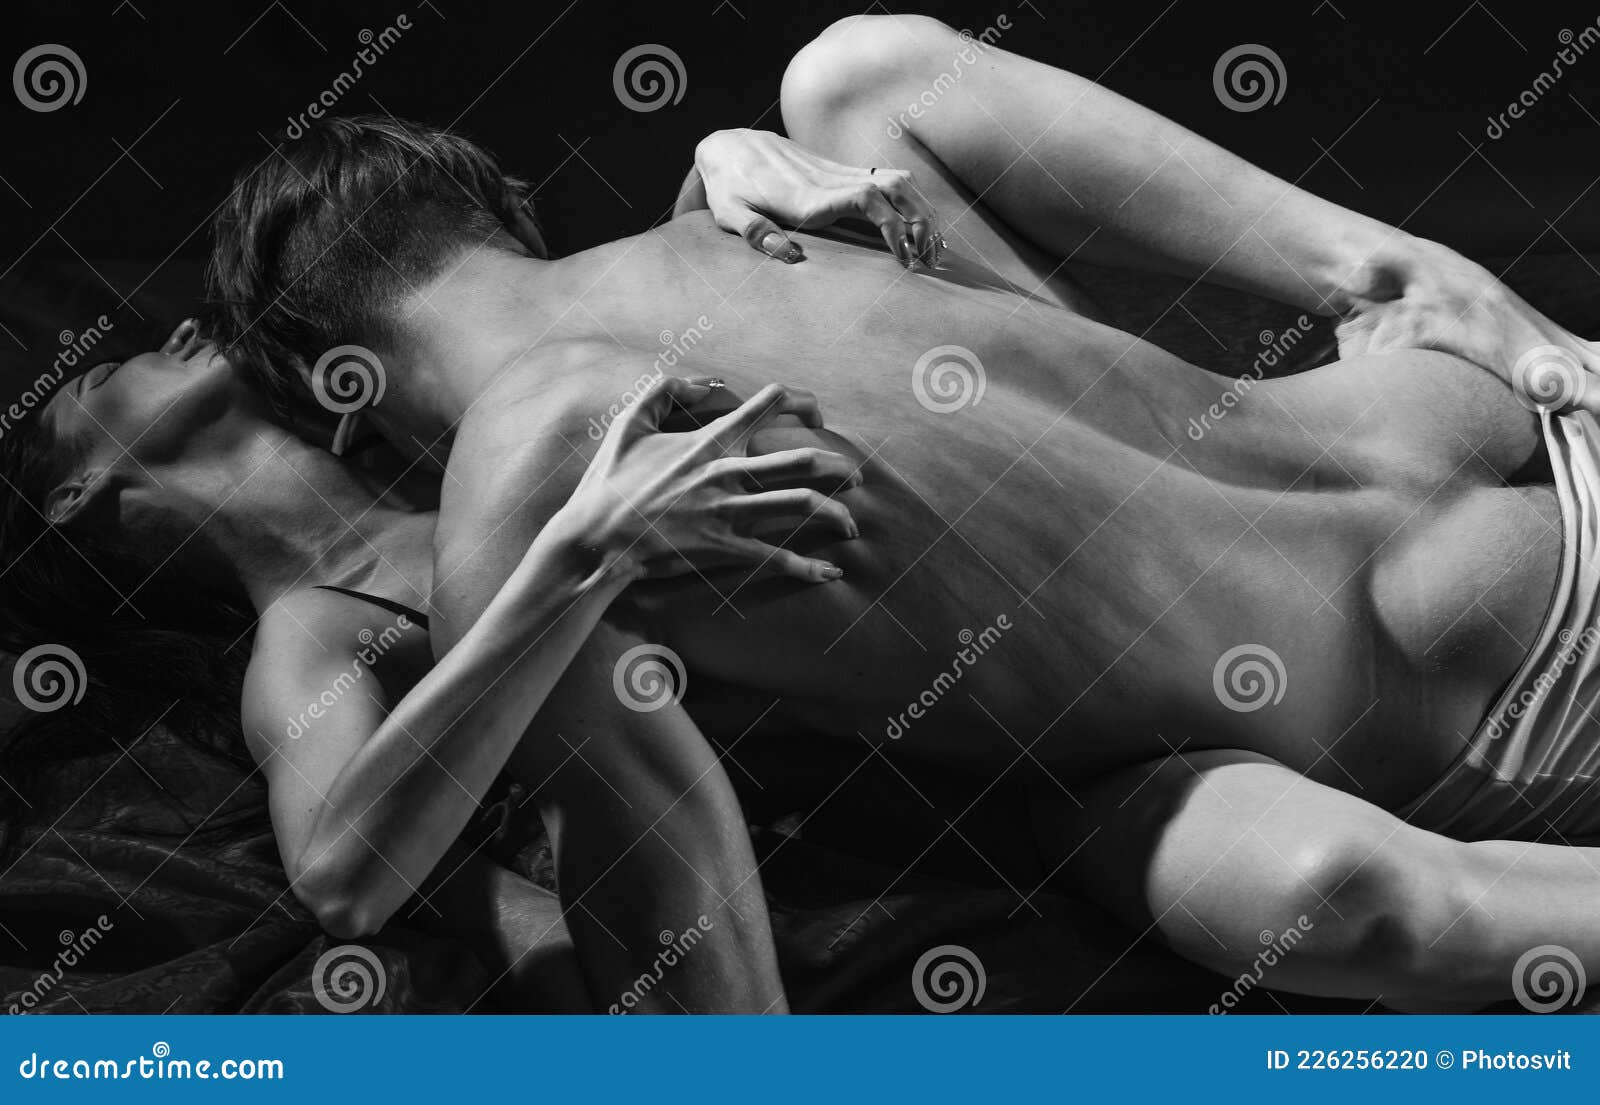 Sensual Couple in Love of Girlfriend and Boyfriend Lovers Having Sex Foreplay with Undressed Body, Passion Stock Photo image